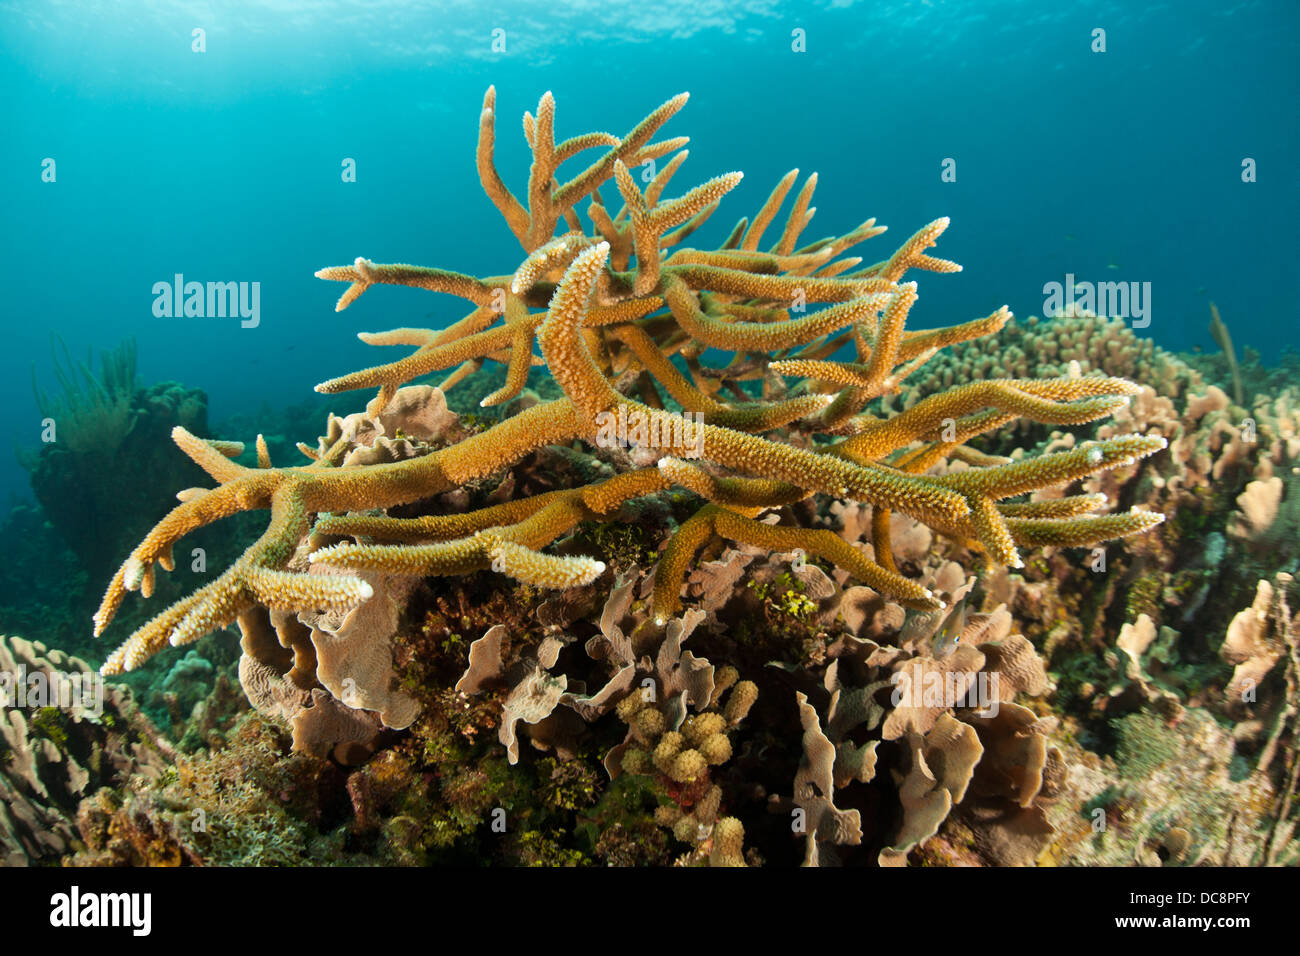 Staghorn Coral (Acropora cervicornis) on a tropical reef off the island of Roatan, Honduras. Stock Photo